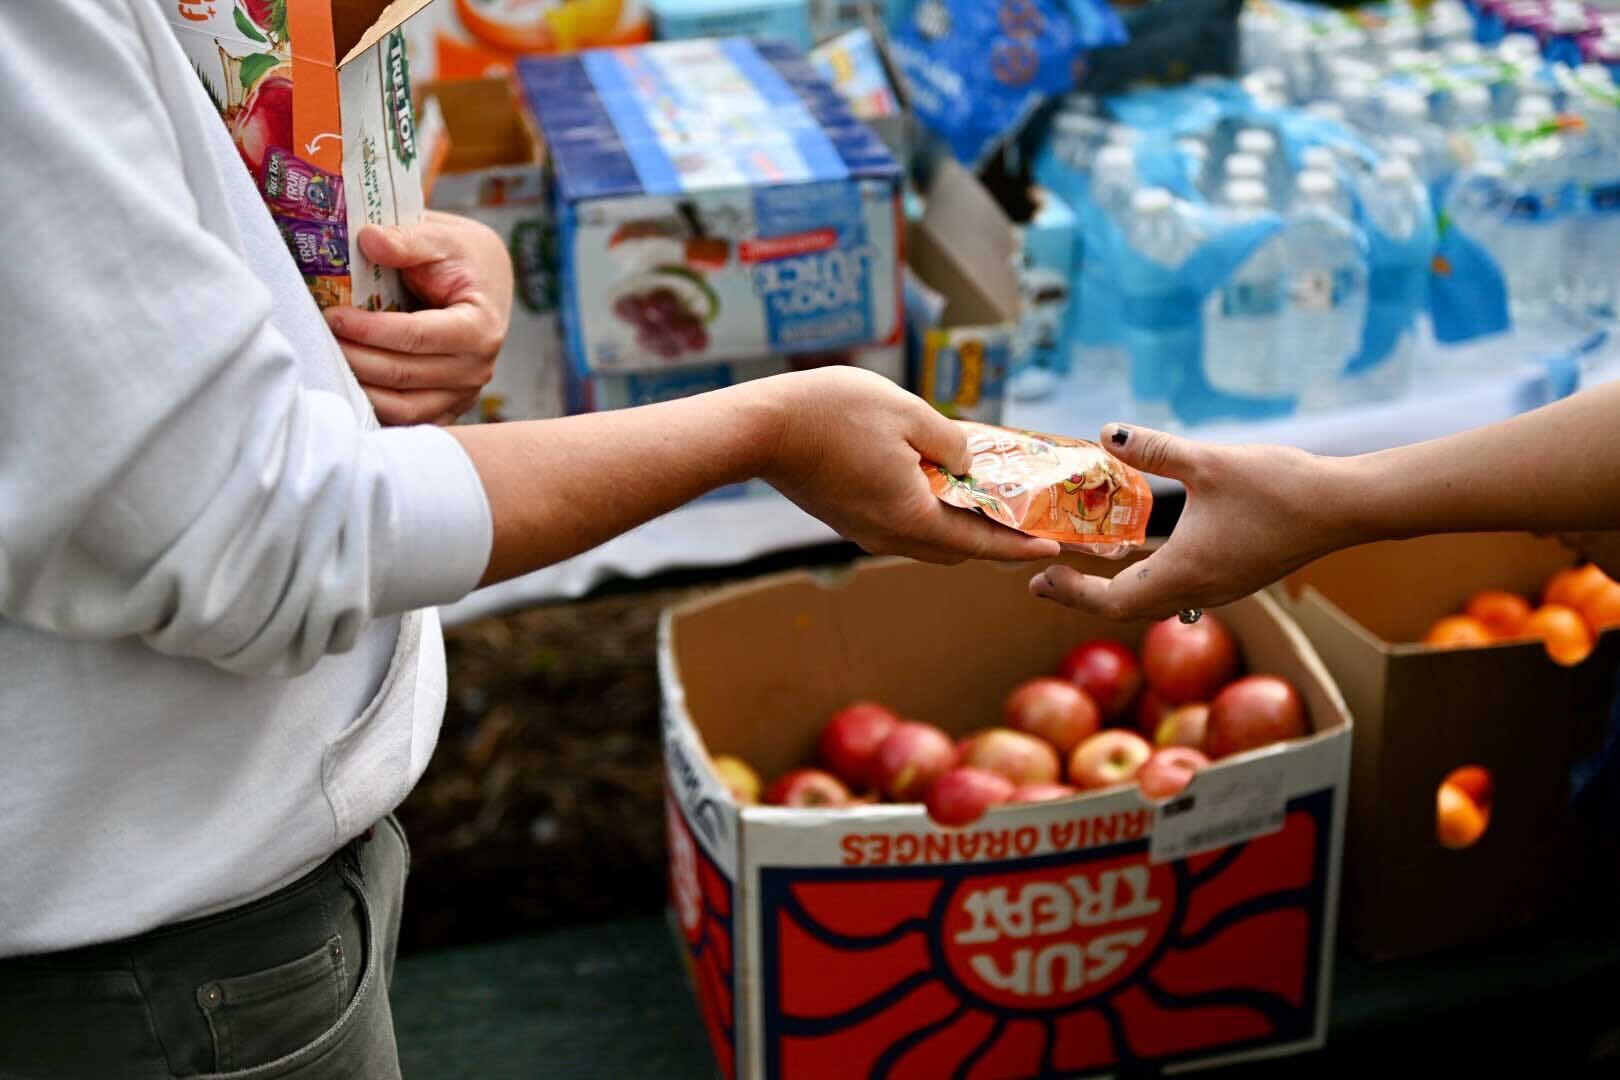 A close-up shot of a grown-up's hand, handing a wrapped snack to a child's hand. A box of red apples and a box of tangerines, along with pallets of water bottles and juice boxes are pictured in the background placed on a park picnic table.